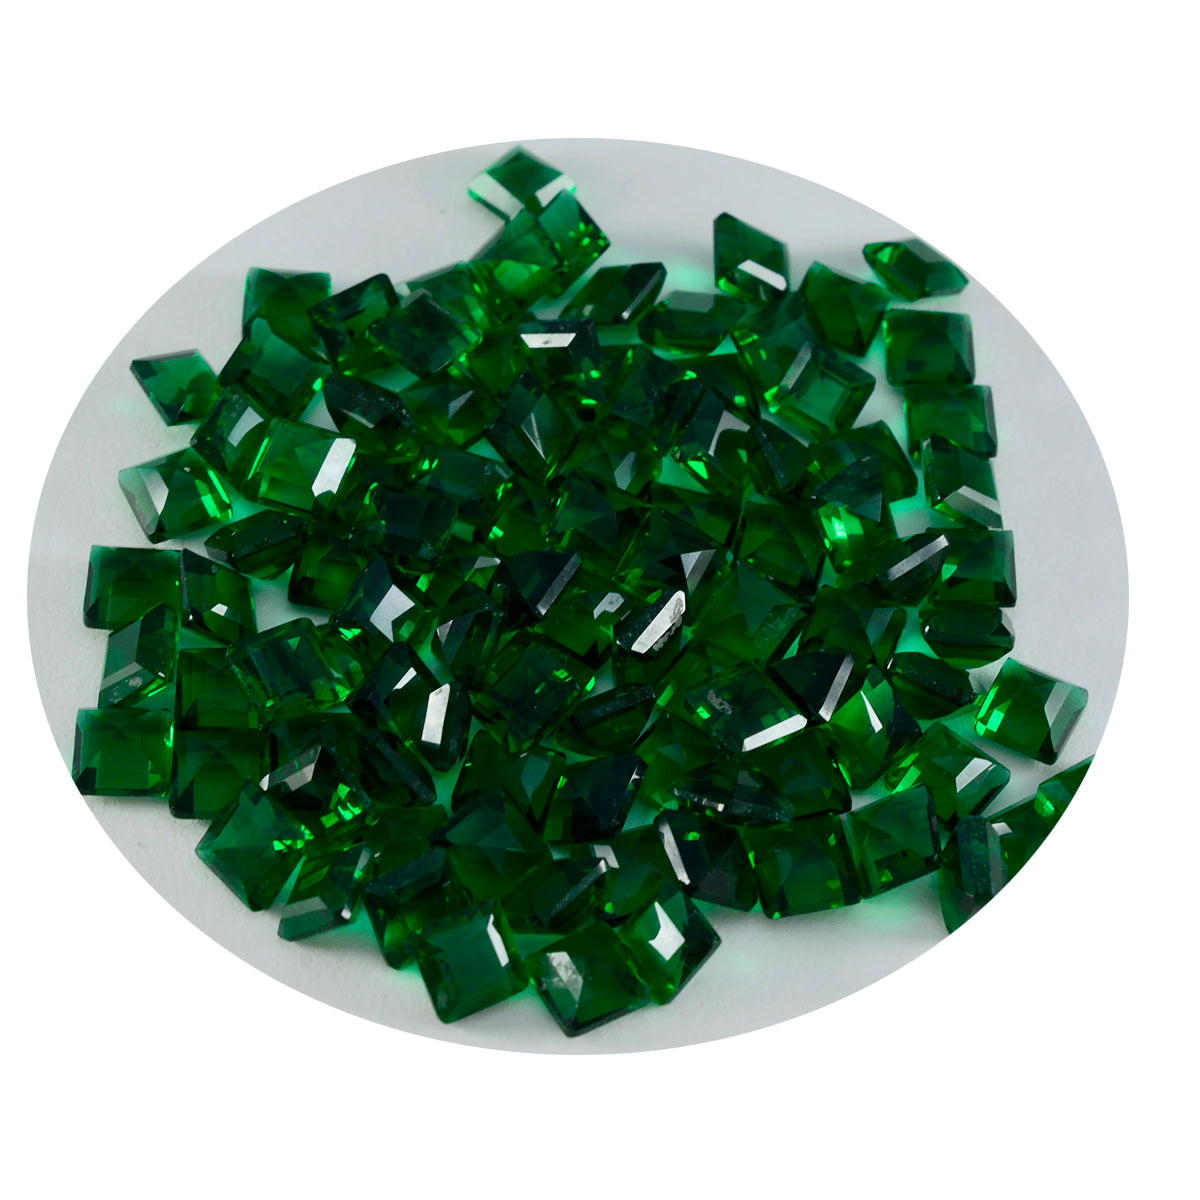 Riyogems 1PC Green Emerald CZ Faceted 4x4 mm Square Shape handsome Quality Loose Gems